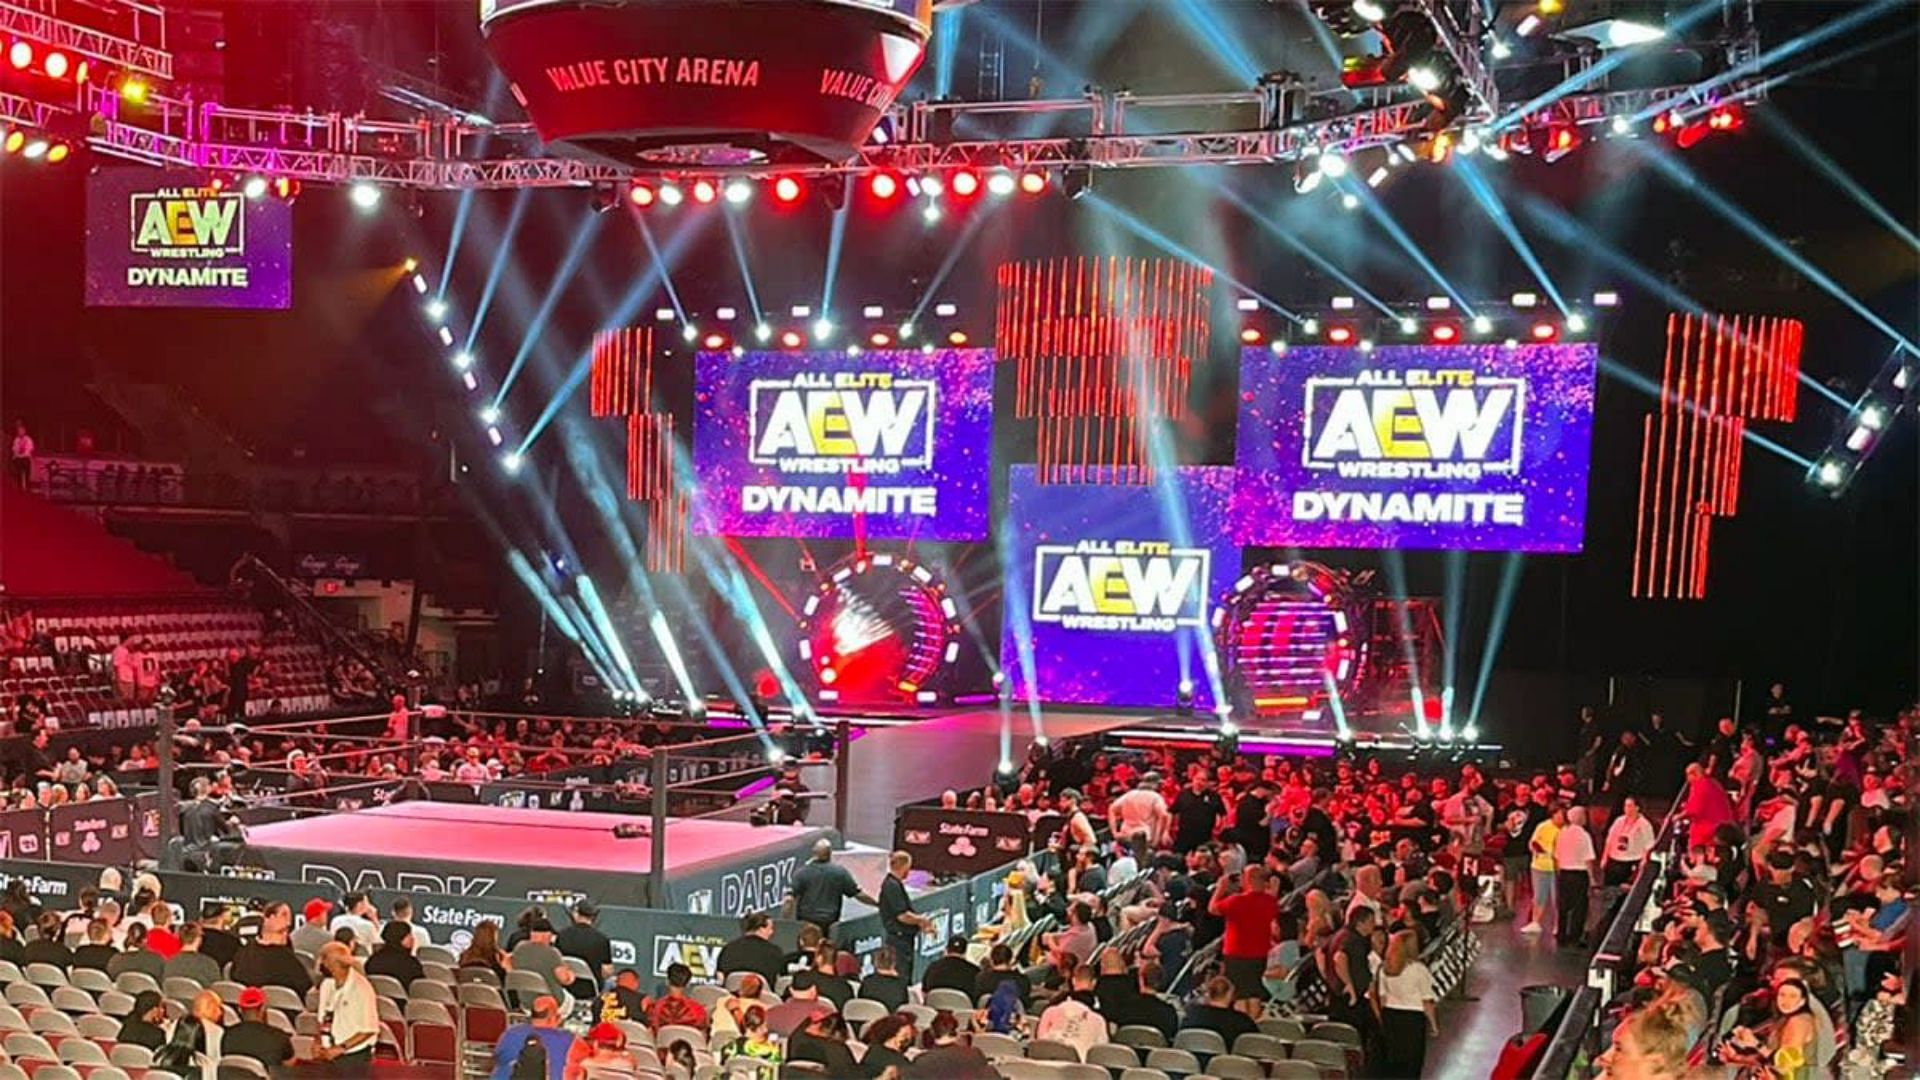 AEW Dynamite arena. Image Credits: Twitter